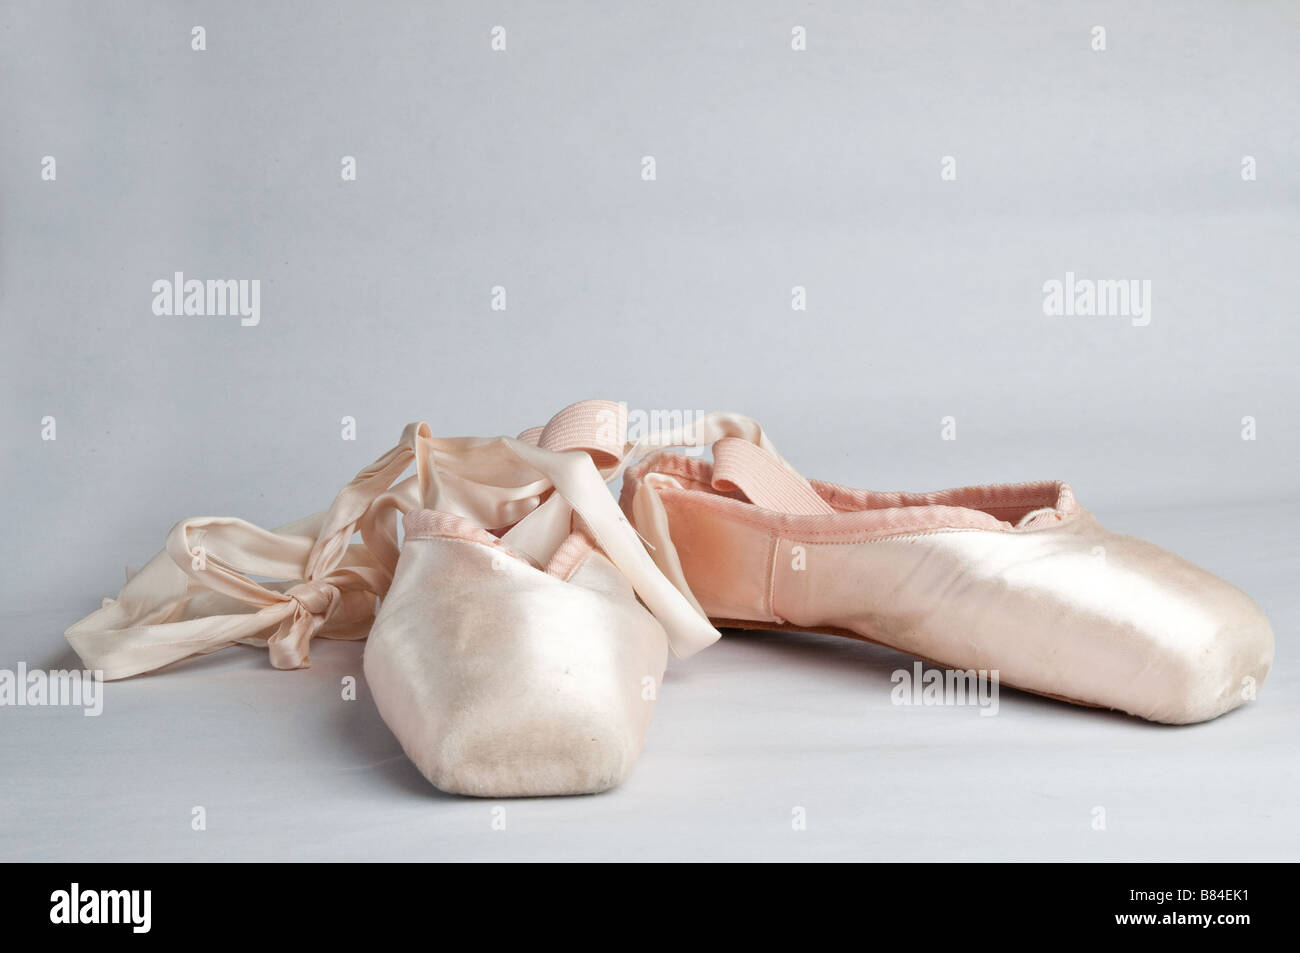 Worn and well used Ballet shoes Stock Photo - Alamy